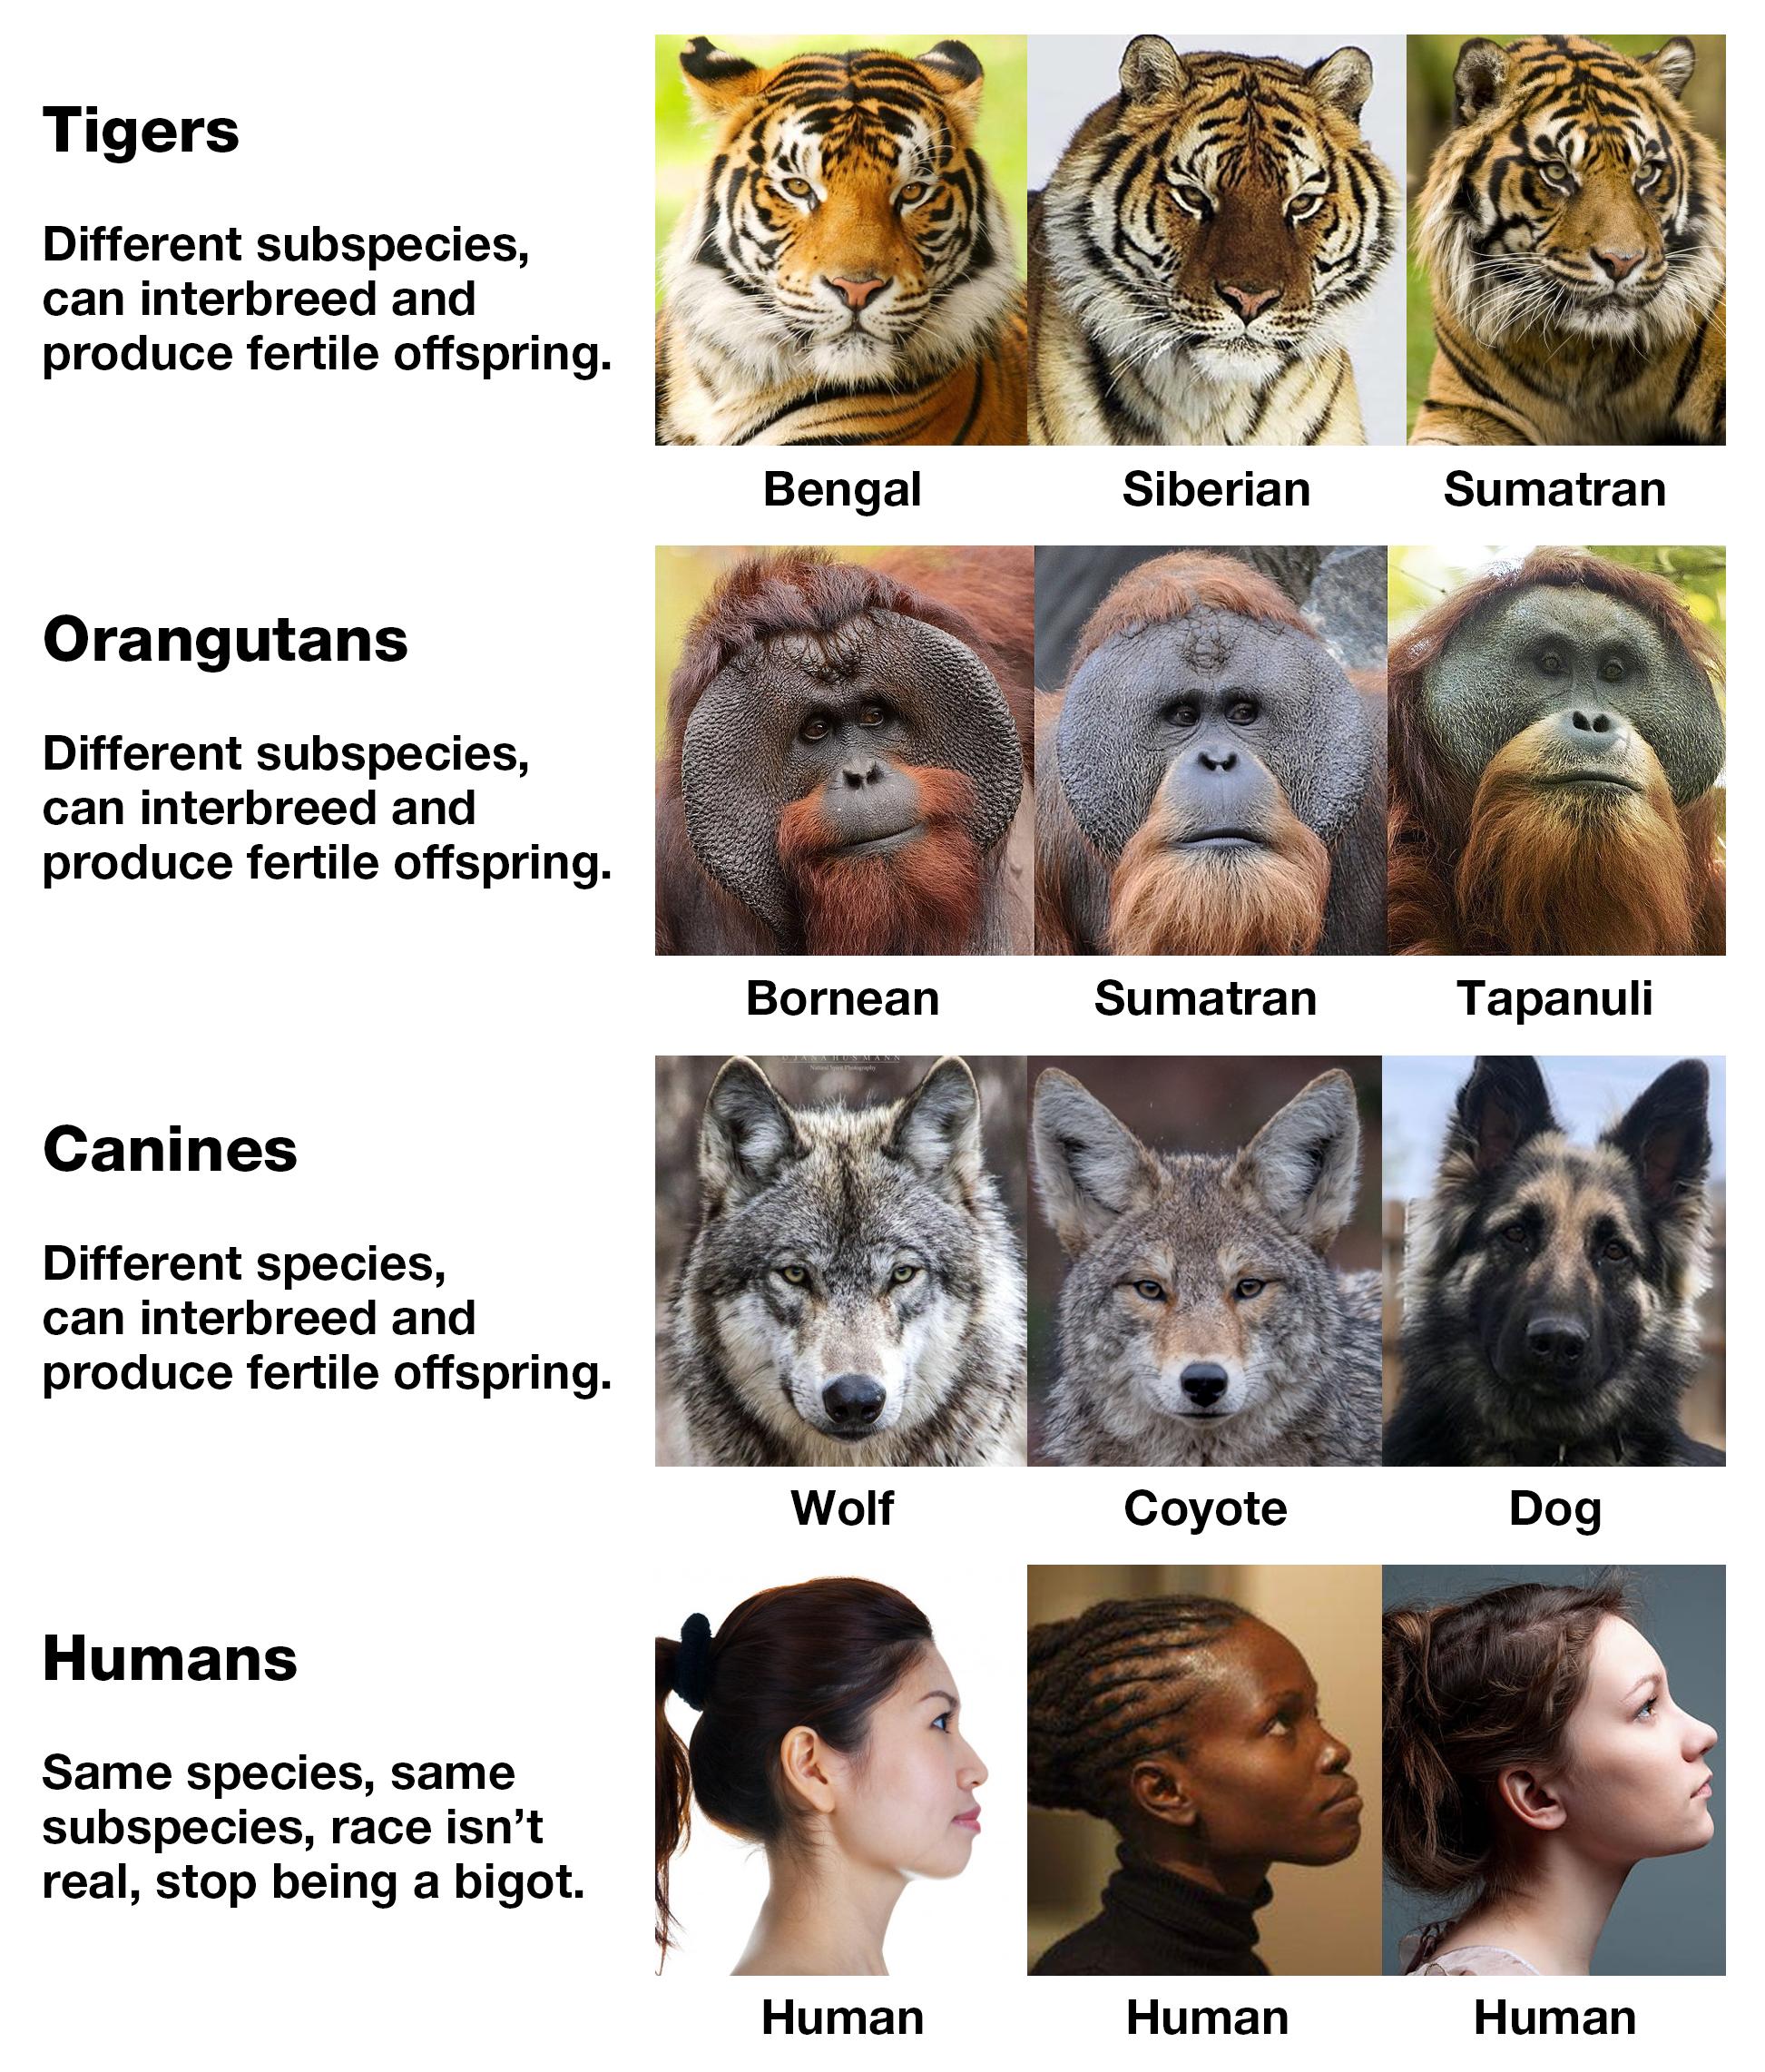 Humans have more genetic diversity than other animals who have distinct subspecies.